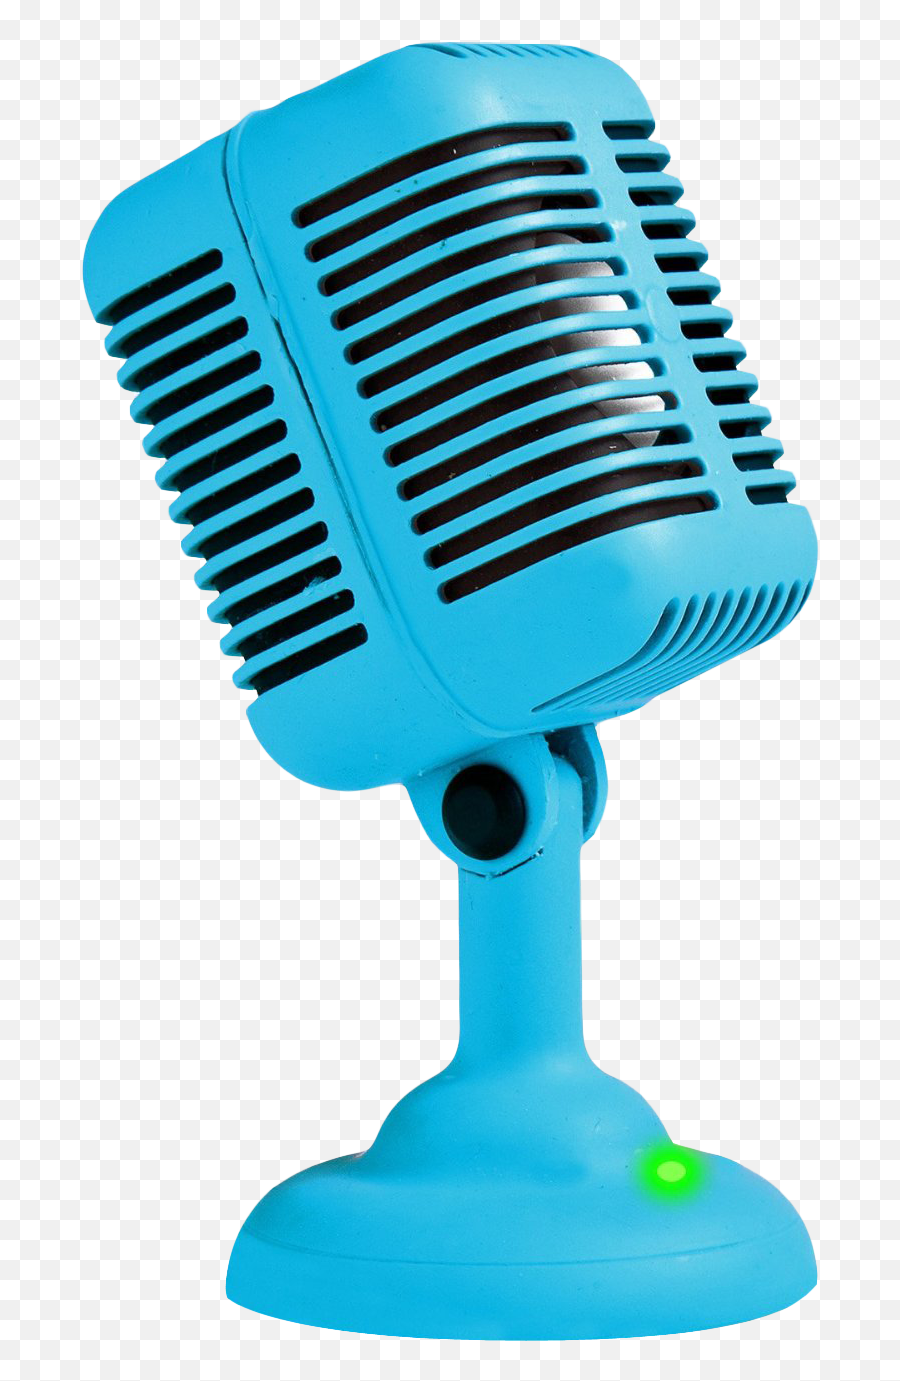 Podcast Microphone Png Image - Podcast Microphone Png Emoji,Microphone Png